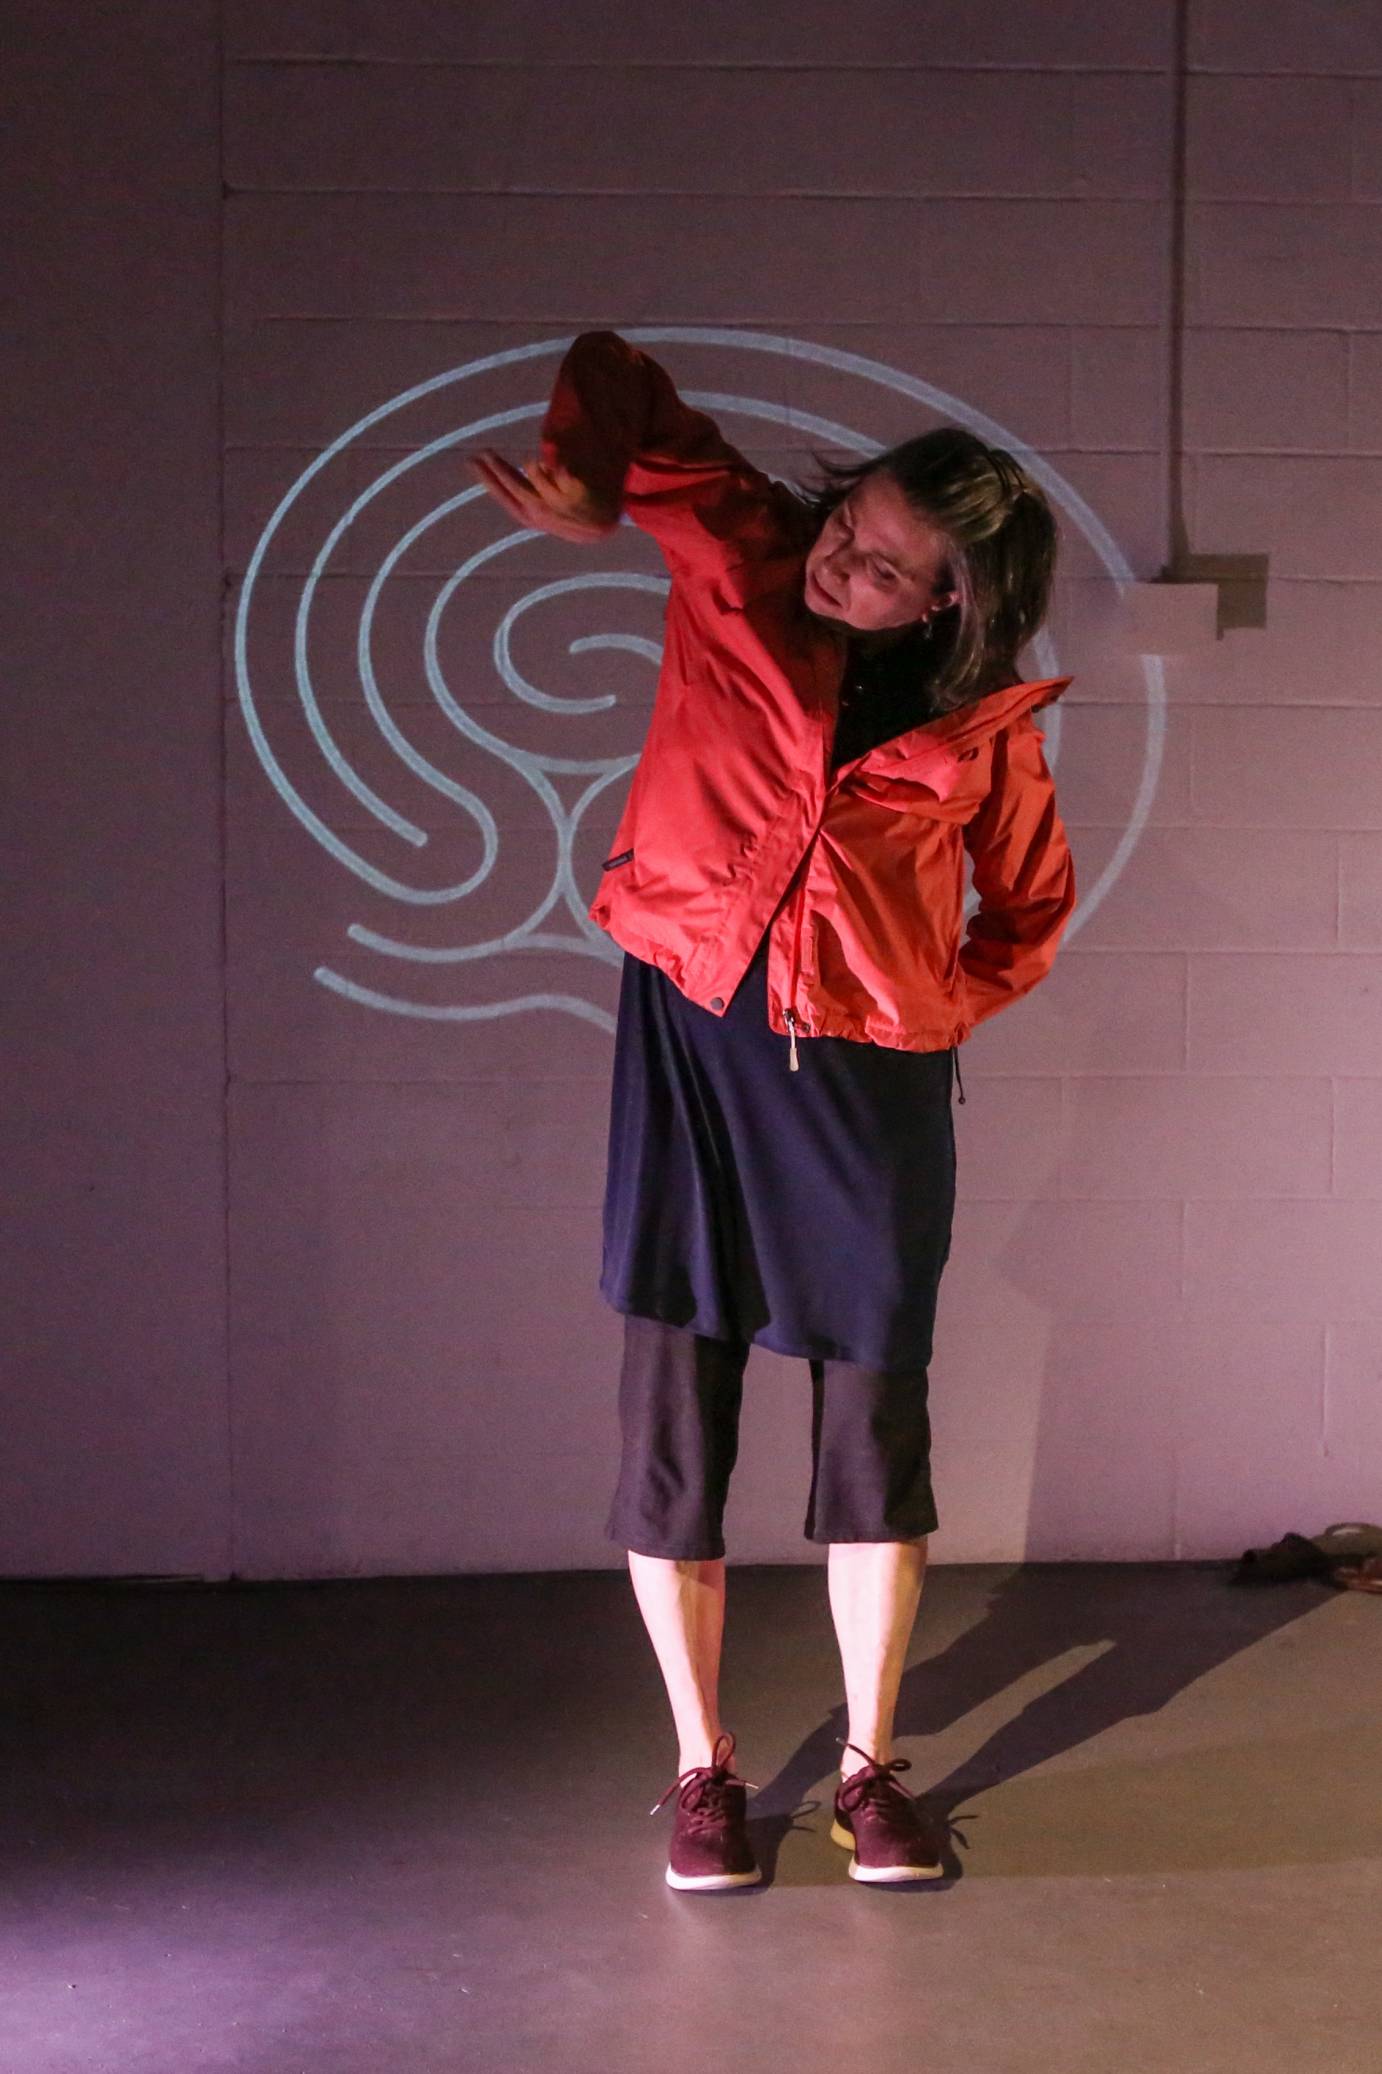 White woman with chin length brown hair dressed in a red dress and black pants right elbow lifted with hand hanging down in front of a white spiral projection on a tan wall